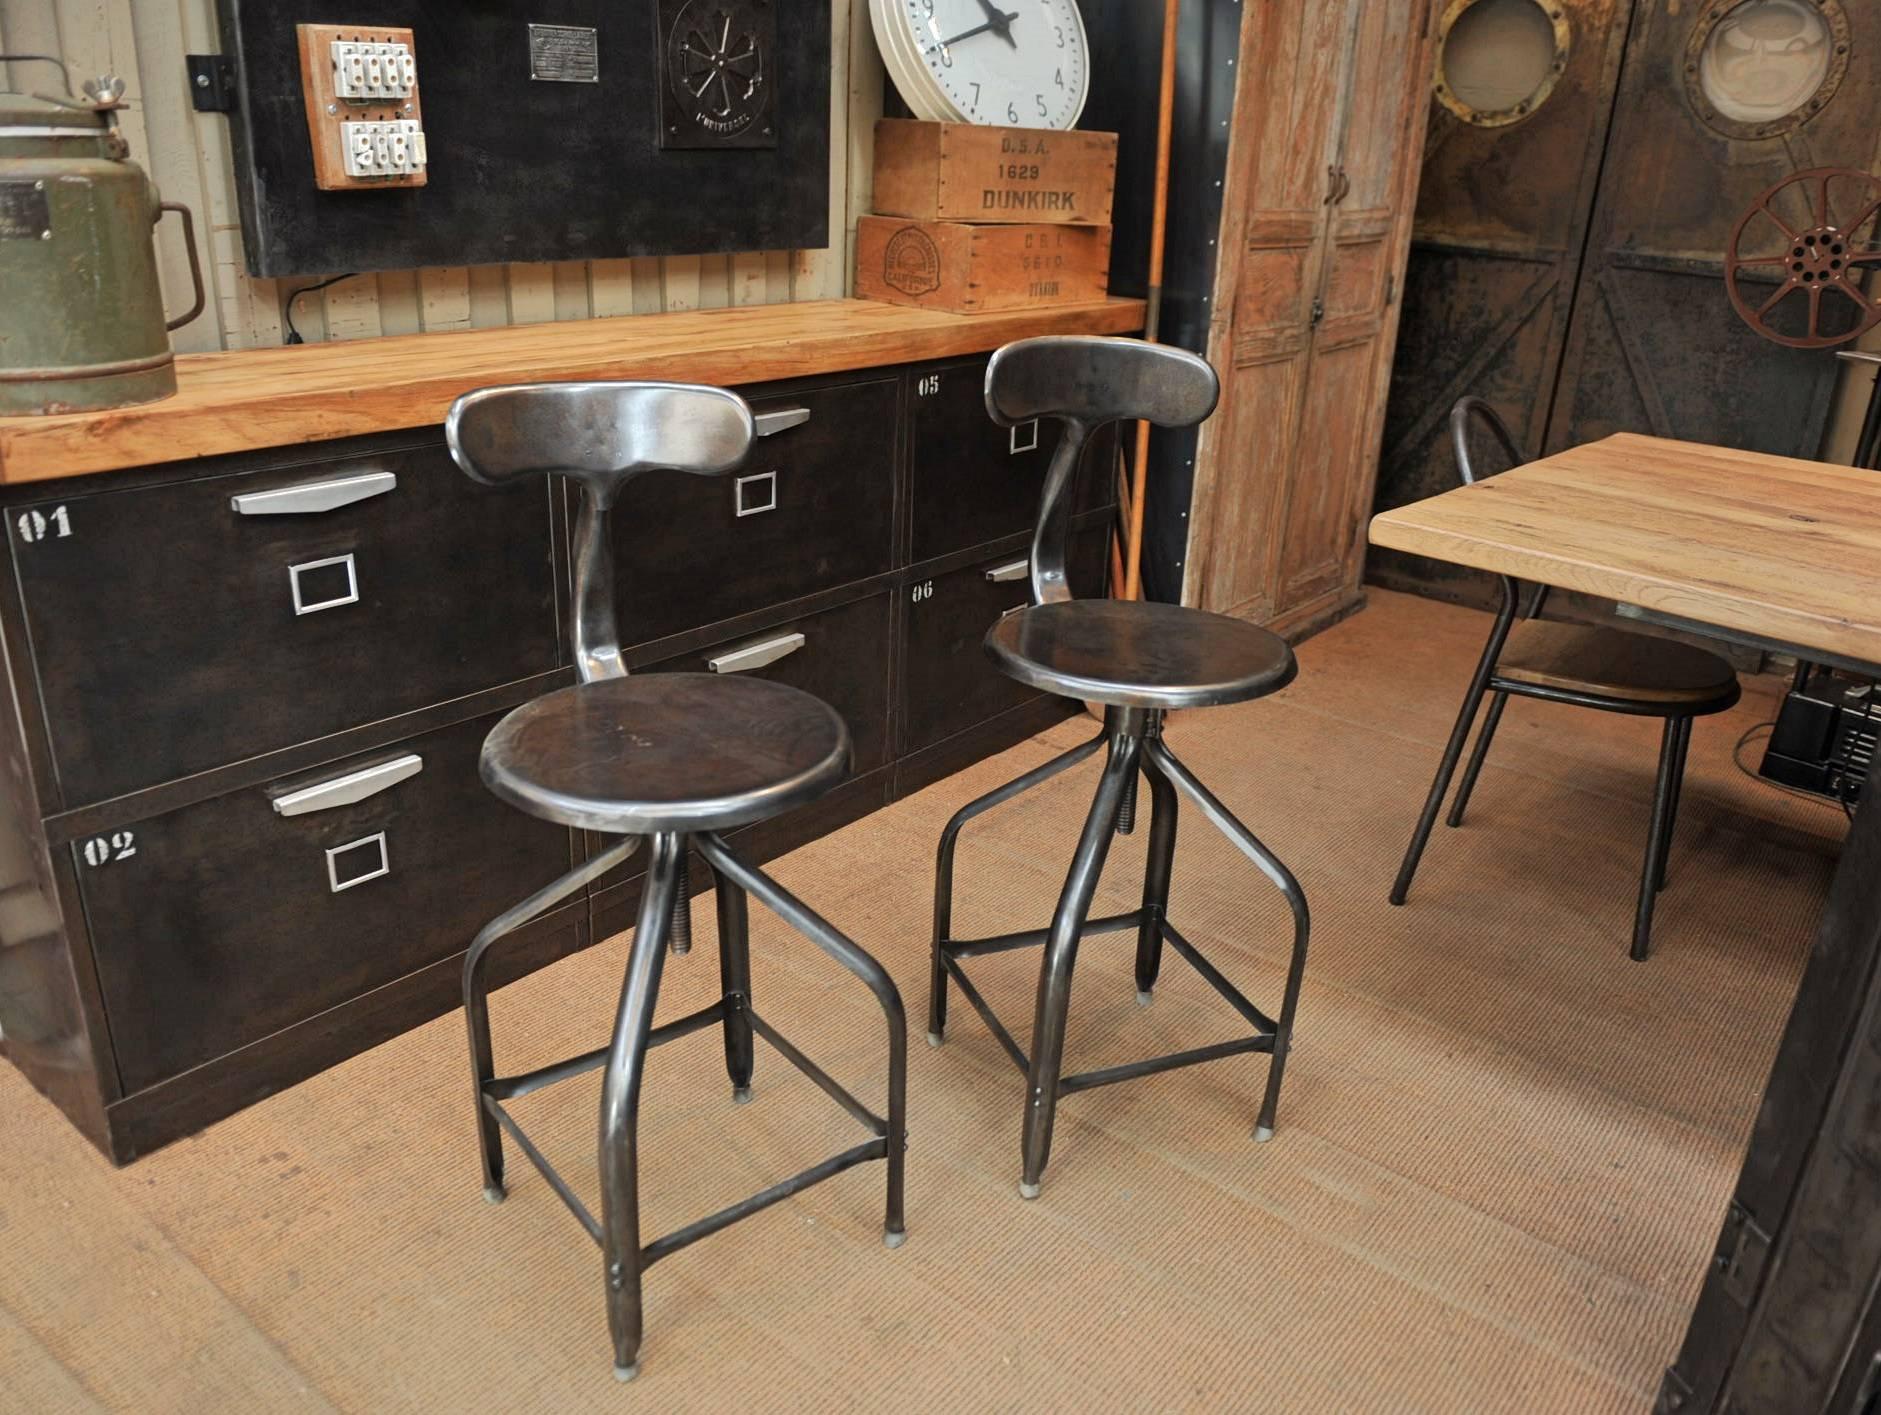 French high stools manufactured by Nicolle in France, 1940s. Polished iron finish.
Height seat adjustable from 65 to 85 cm available.